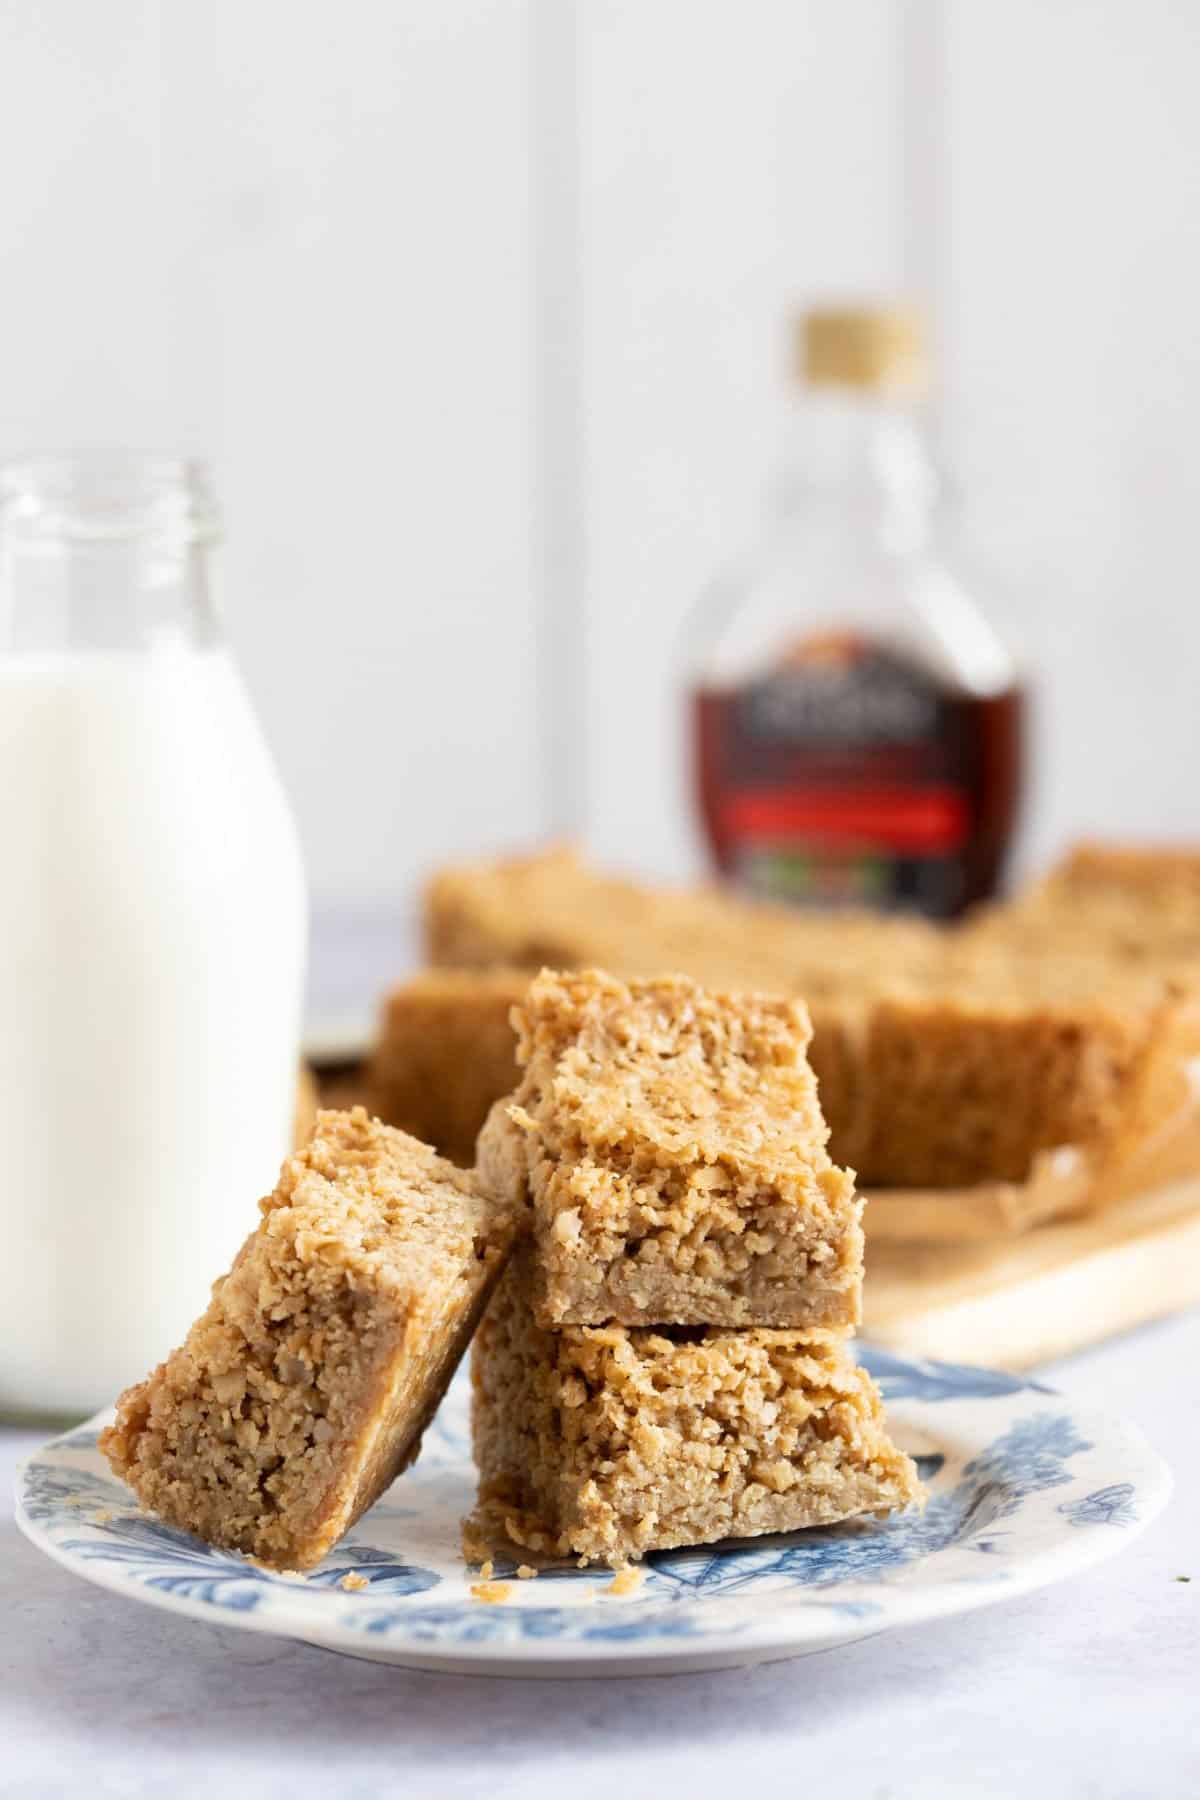 A plate of maple syrup flapjacks with a glass of milk.